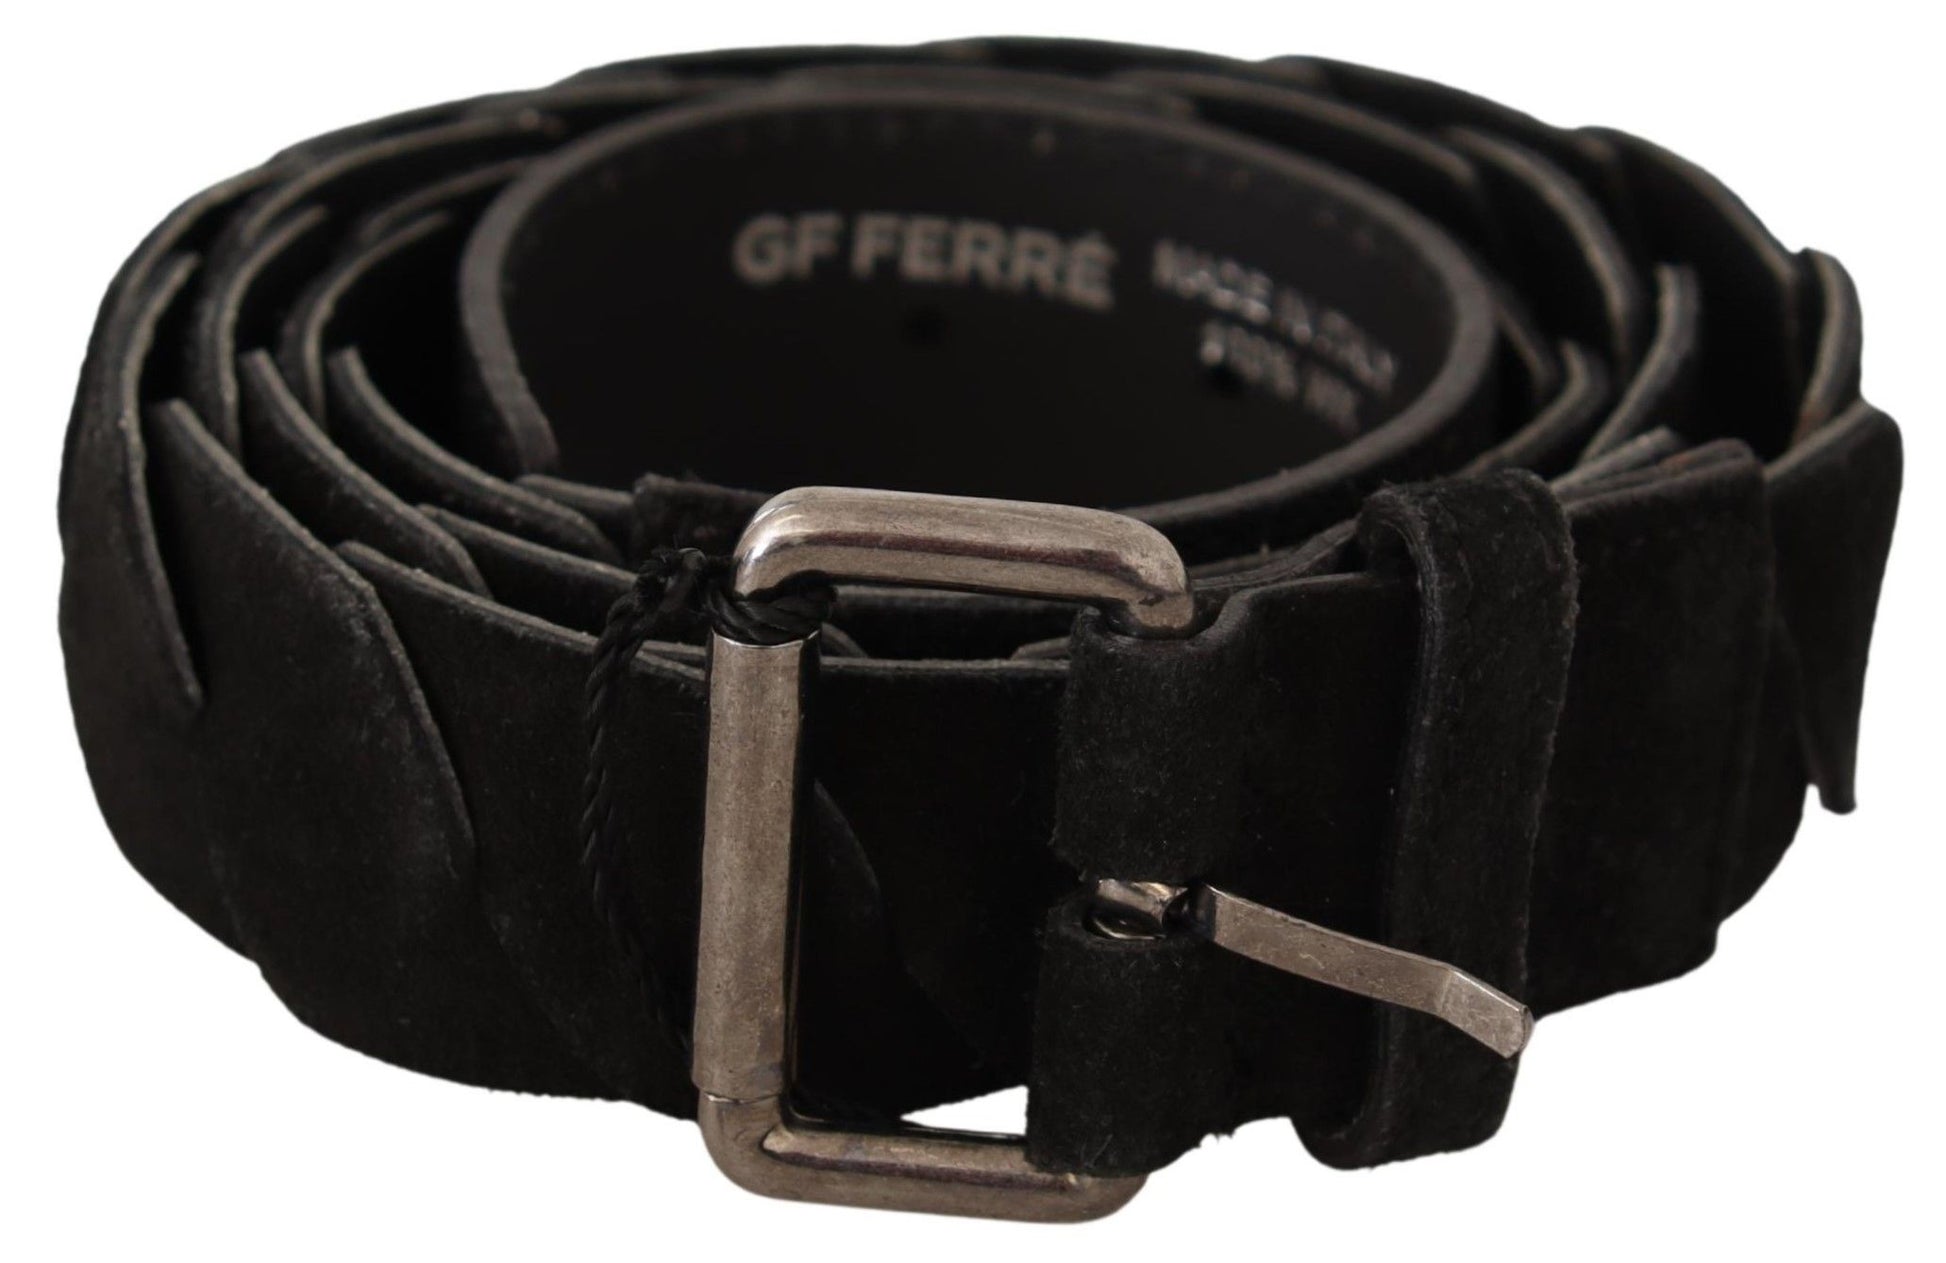 Black WX Silver Tone Buckle Waist Belt - Designed by GF Ferre Available to Buy at a Discounted Price on Moon Behind The Hill Online Designer Discount Store